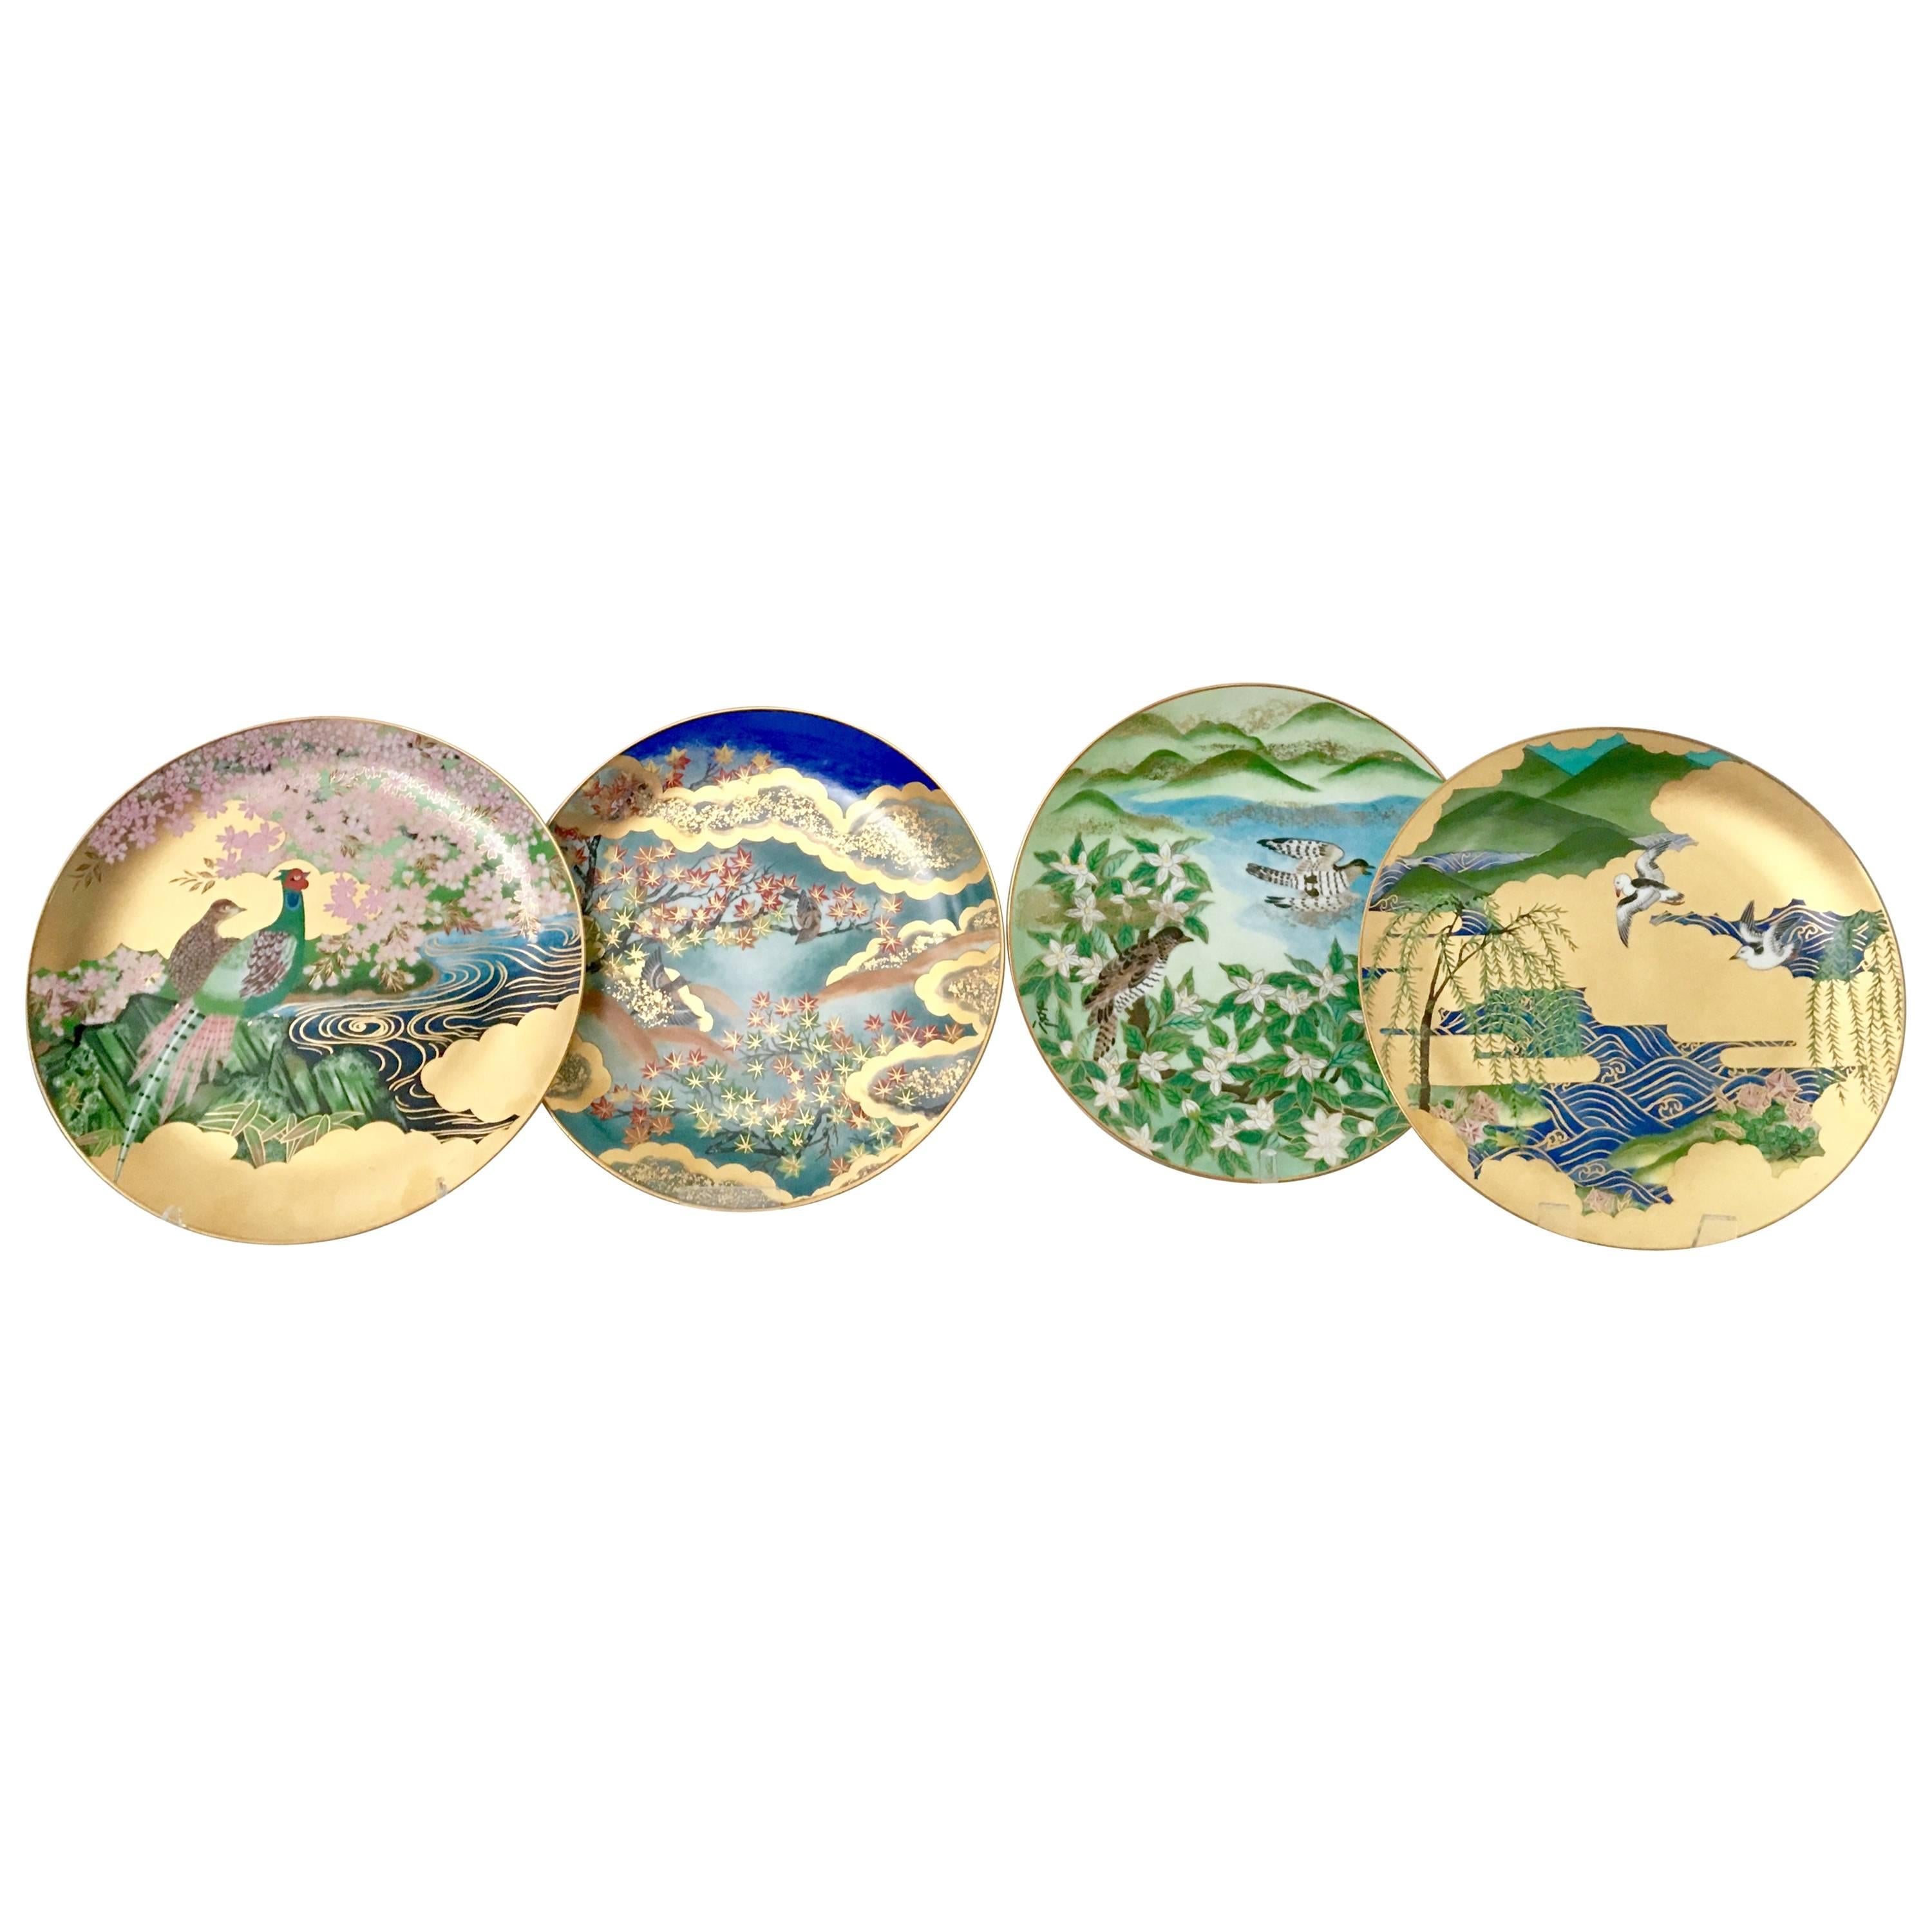 1986 Japanese Limited Edition Hand-Painted Porcelain Plates Set Of 4 For Sale